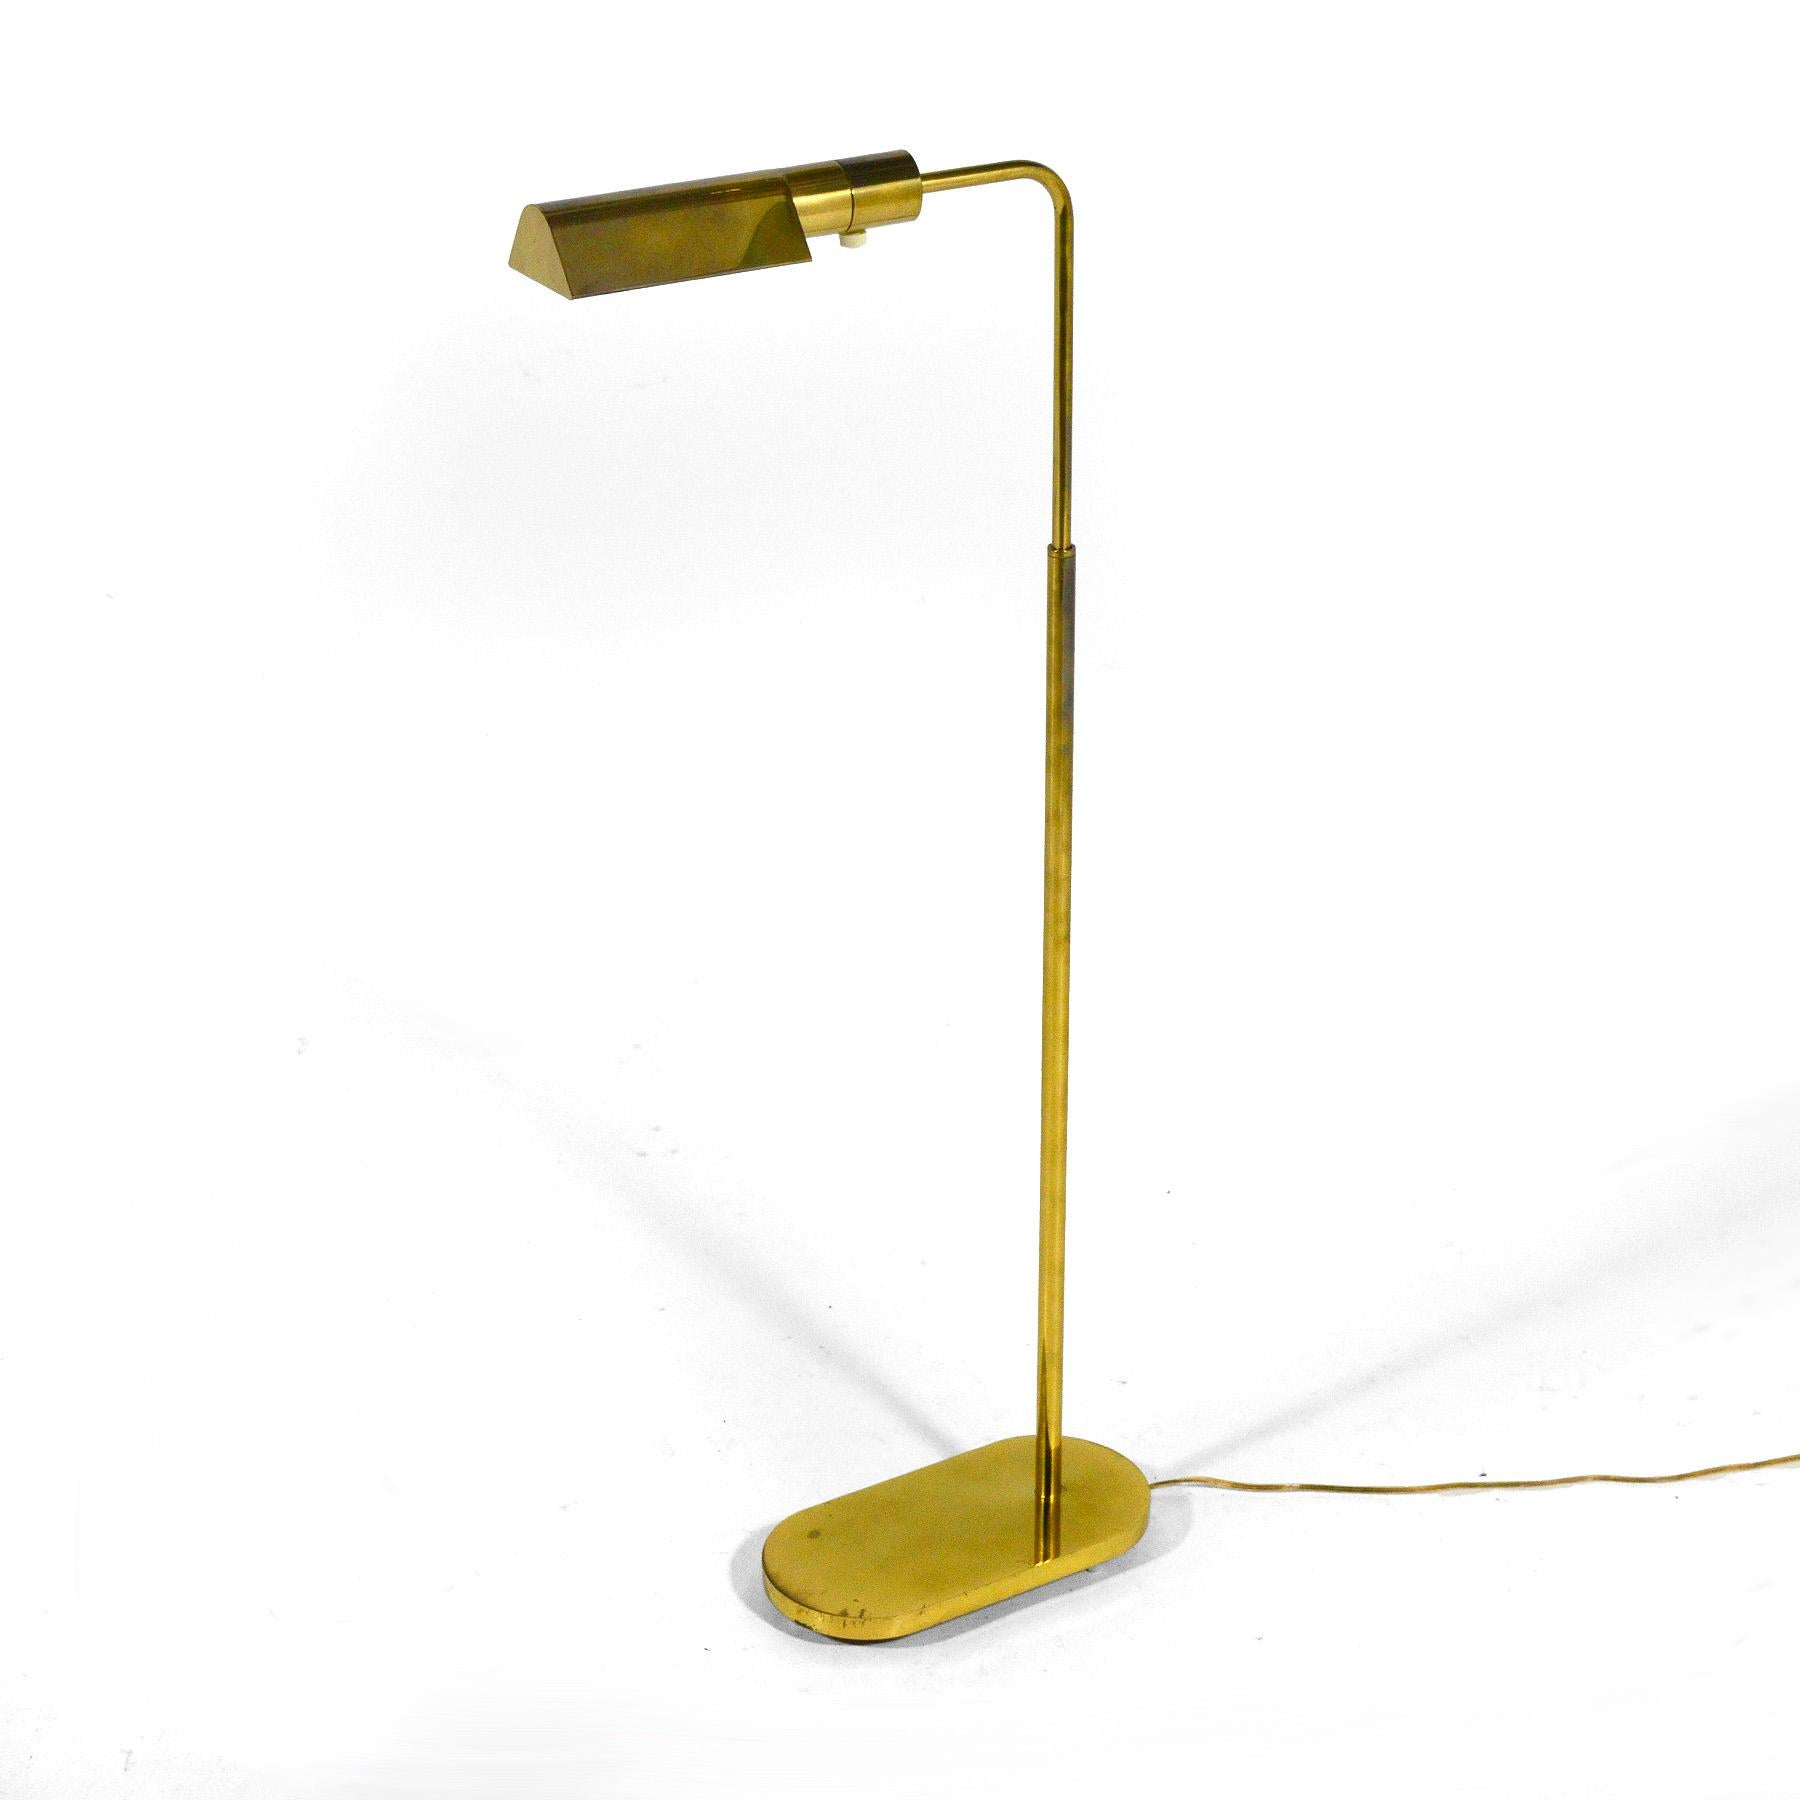 This wonderful pharmacy floor lamp designed by Jon Norman for Casella is impeccably constructed of solid brass. The heavy oval base is raised on nylon feet for a subtle reveal and supports and adjustable neck that’s topped with a classic triangular